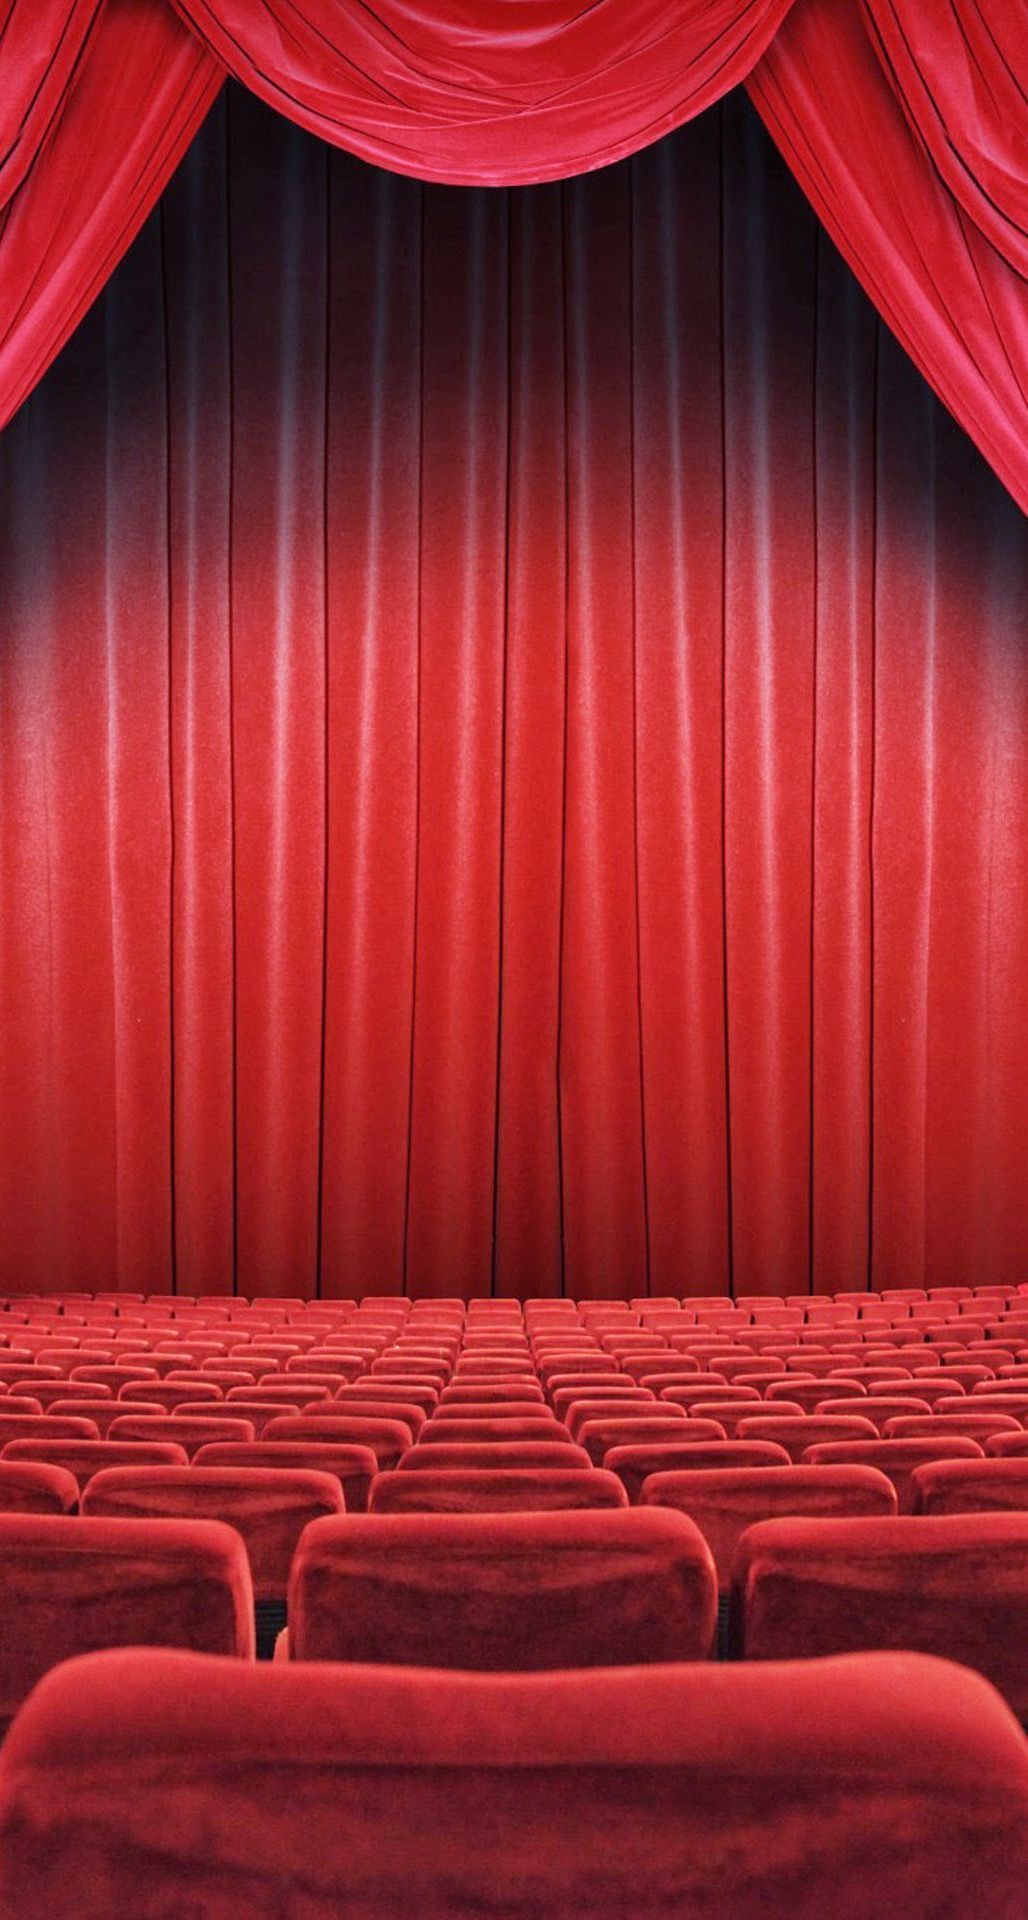 Theater Wallpaper, Movie Theater Wallpaper Theater Background Clarisse. Movie theater, Red curtains, Theater seating